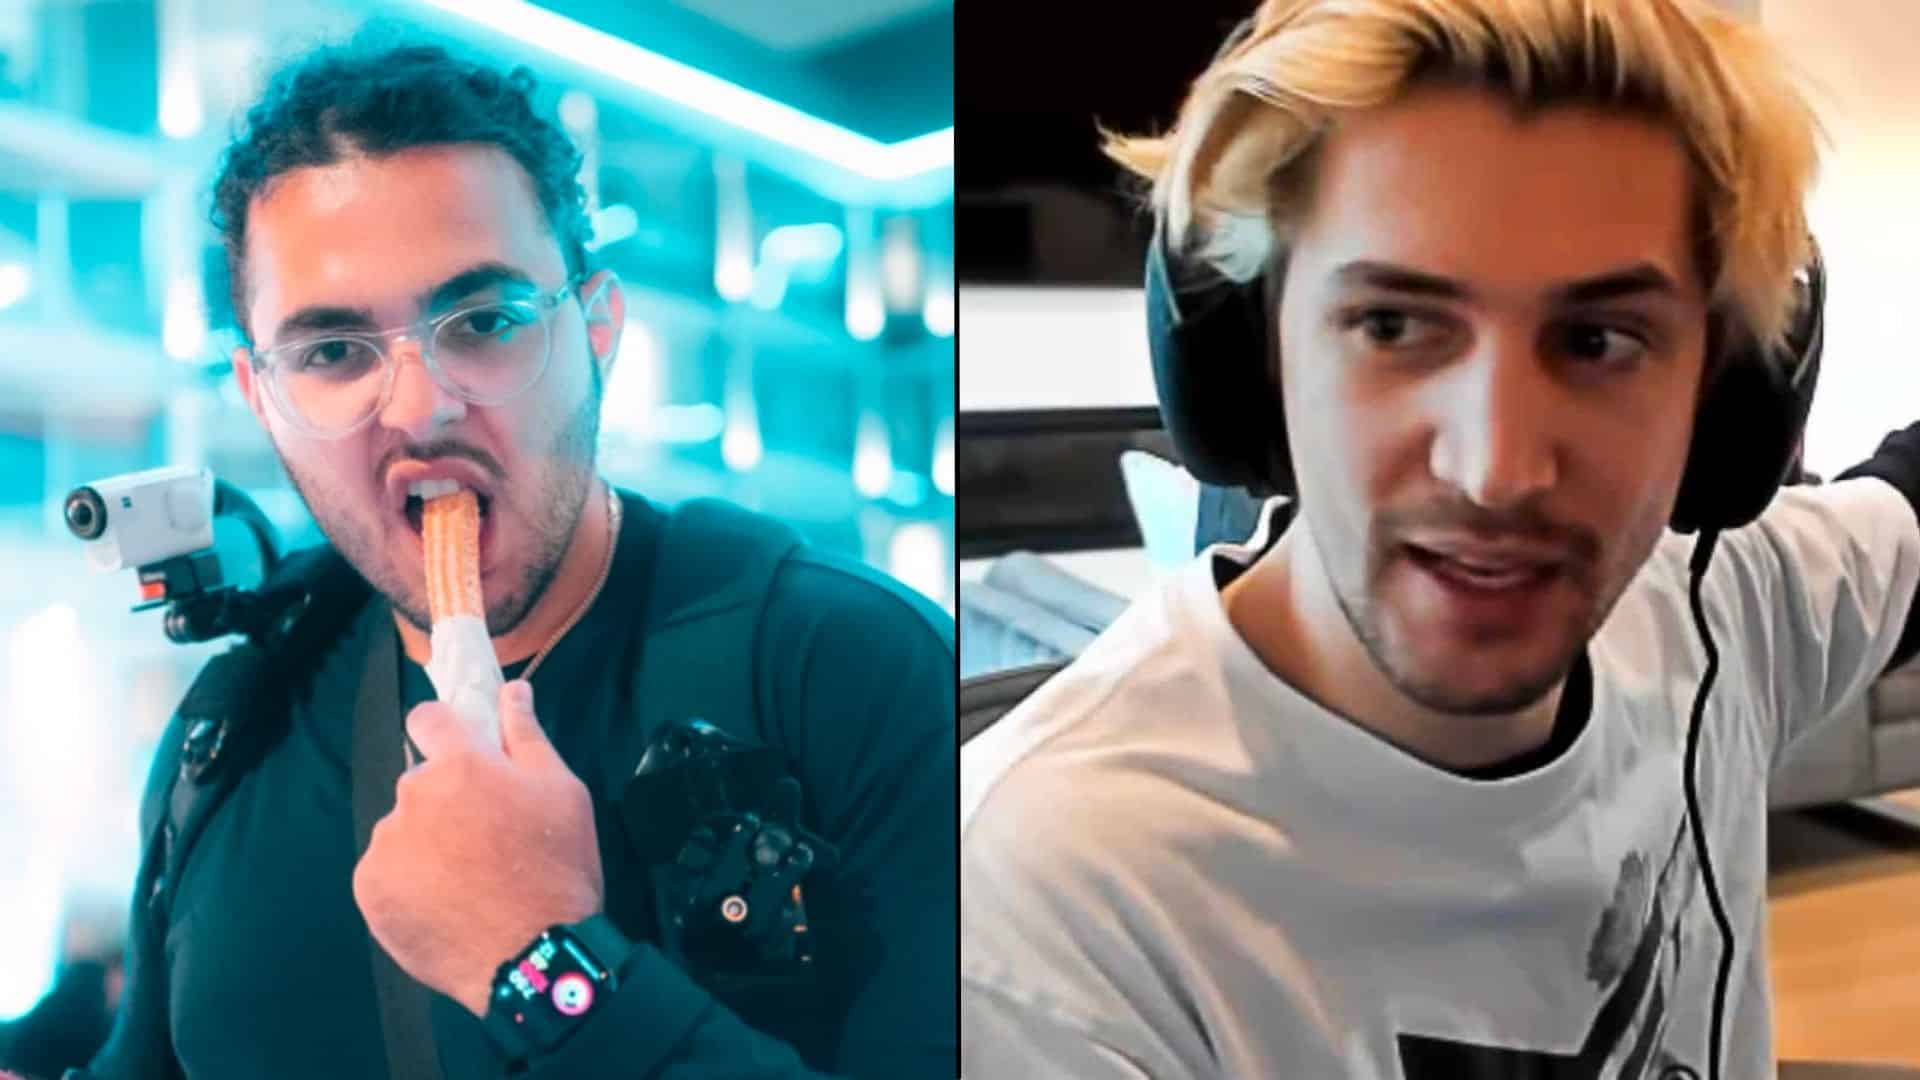 Twitch streamers Arab and xQc side-by-side